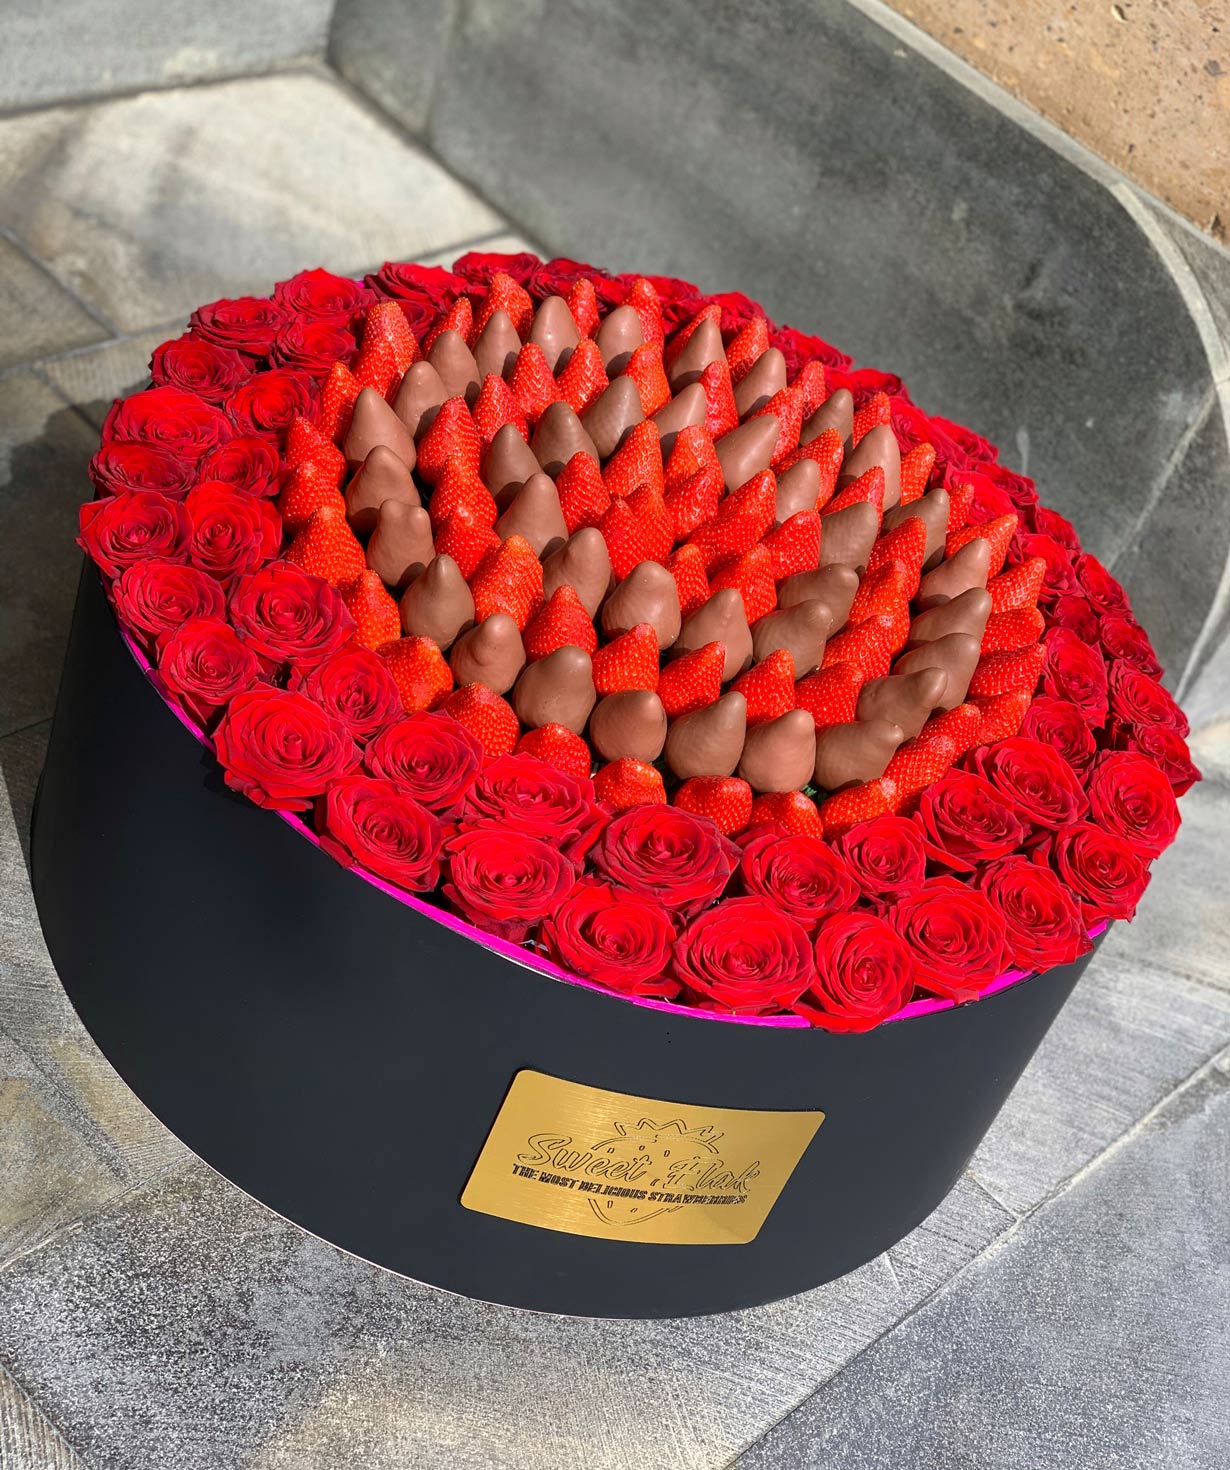 Composition `Sweet Elak` with strawberries and roses